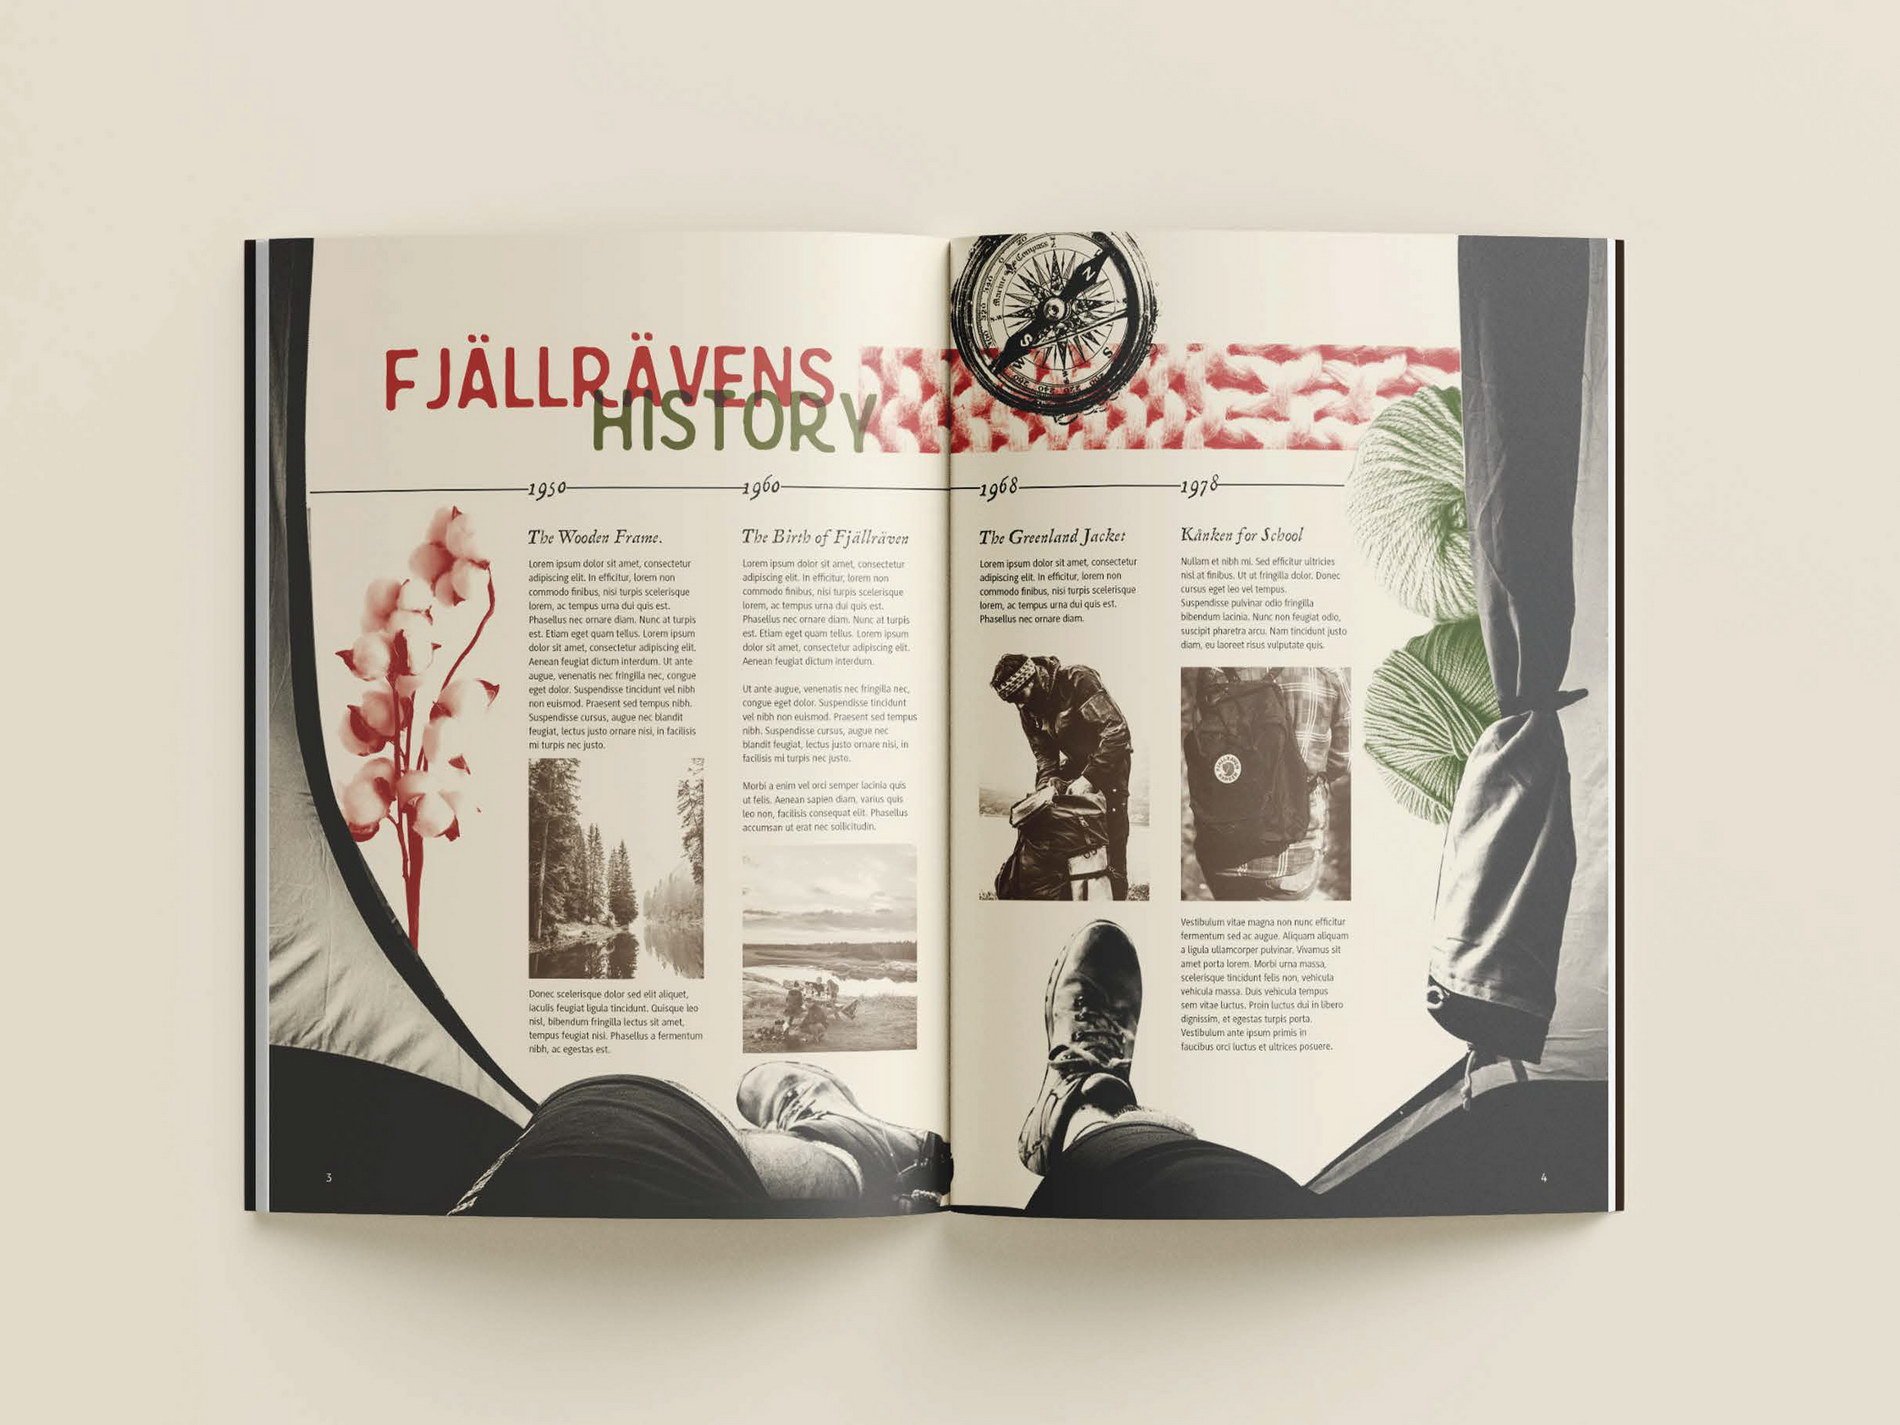 angelica-blanch--fjallraven--annual-report--community-report--communication-design--information-design--advertising--design-in-business-and-marketing--capilano-university-idea-school-of-design-3.jpg